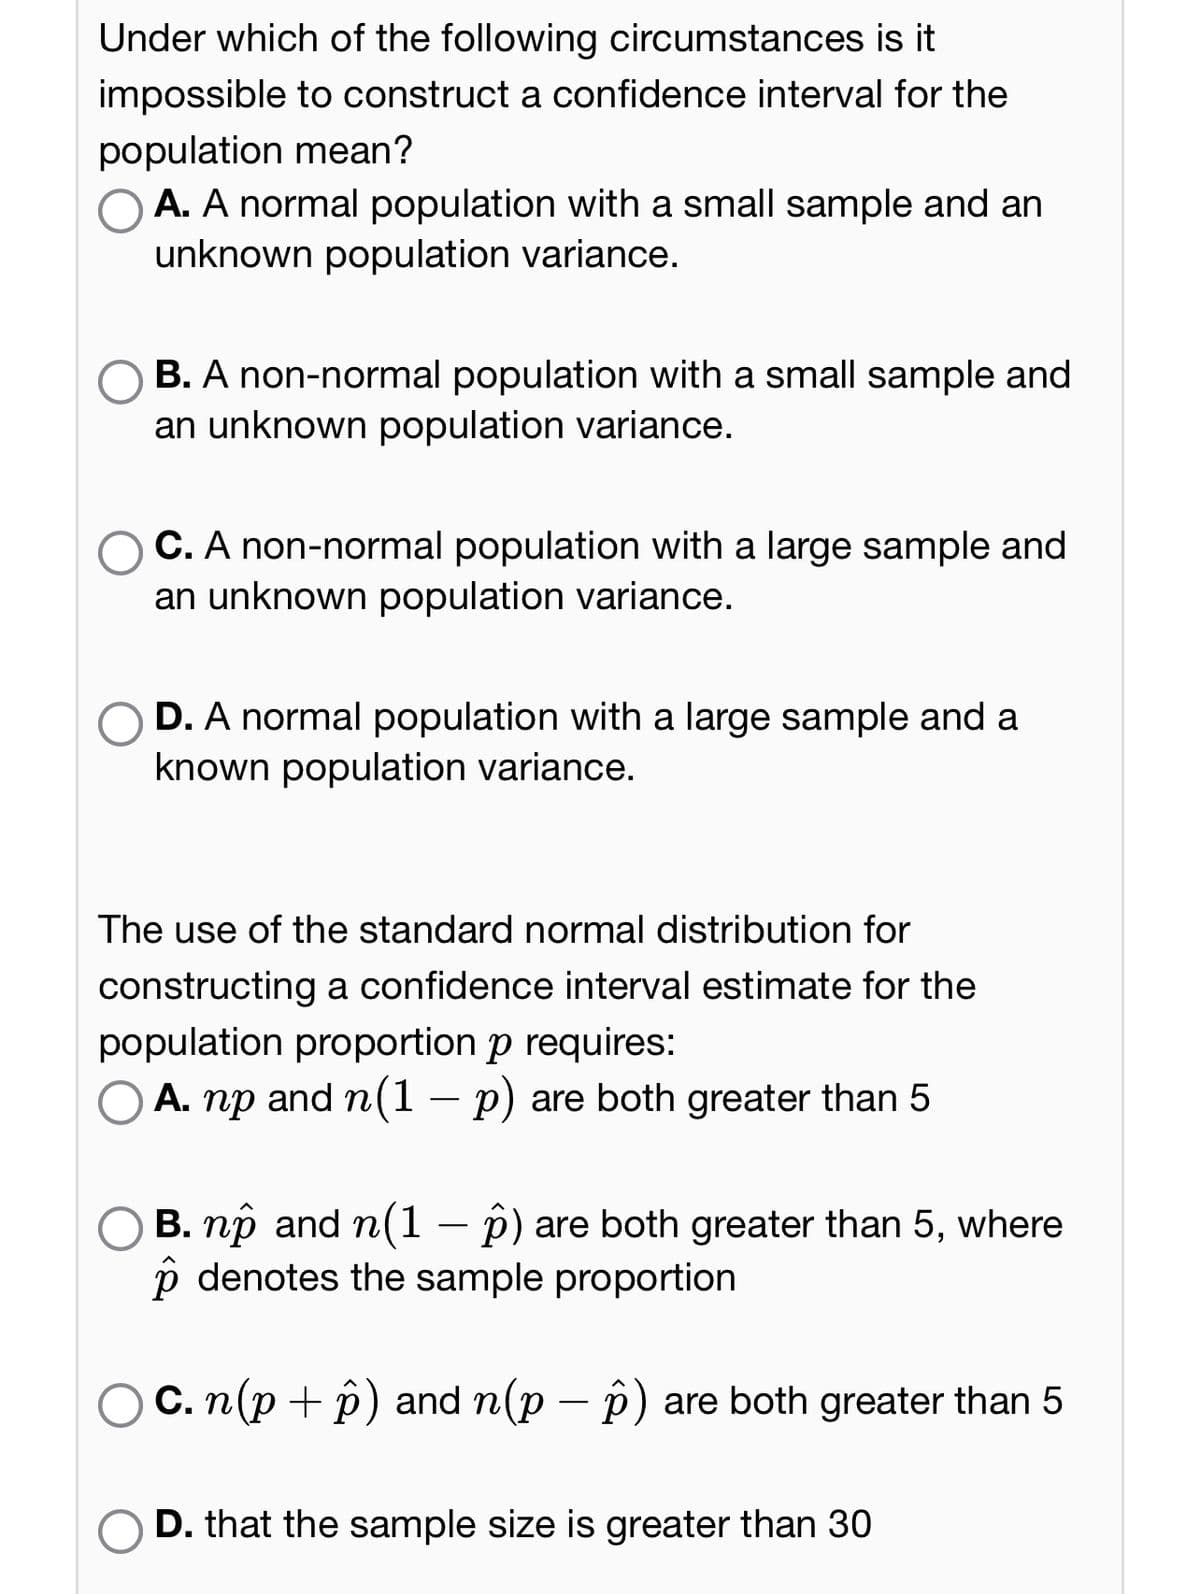 Under which of the following circumstances is it
impossible to construct a confidence interval for the
population mean?
A. A normal population with a small sample and an
unknown population variance.
B. A non-normal population with a small sample and
an unknown population variance.
C. A non-normal population with a large sample and
an unknown population variance.
D. A normal population with a large sample and a
known population variance.
The use of the standard normal distribution for
constructing a confidence interval estimate for the
population proportion p requires:
A. np and n(1 − p) are both greater than 5
B. nô and n(1 − p) are both greater than 5, where
p denotes the sample proportion
c. n(p + p) and n(p − p) are both greater than 5
D. that the sample size is greater than 30